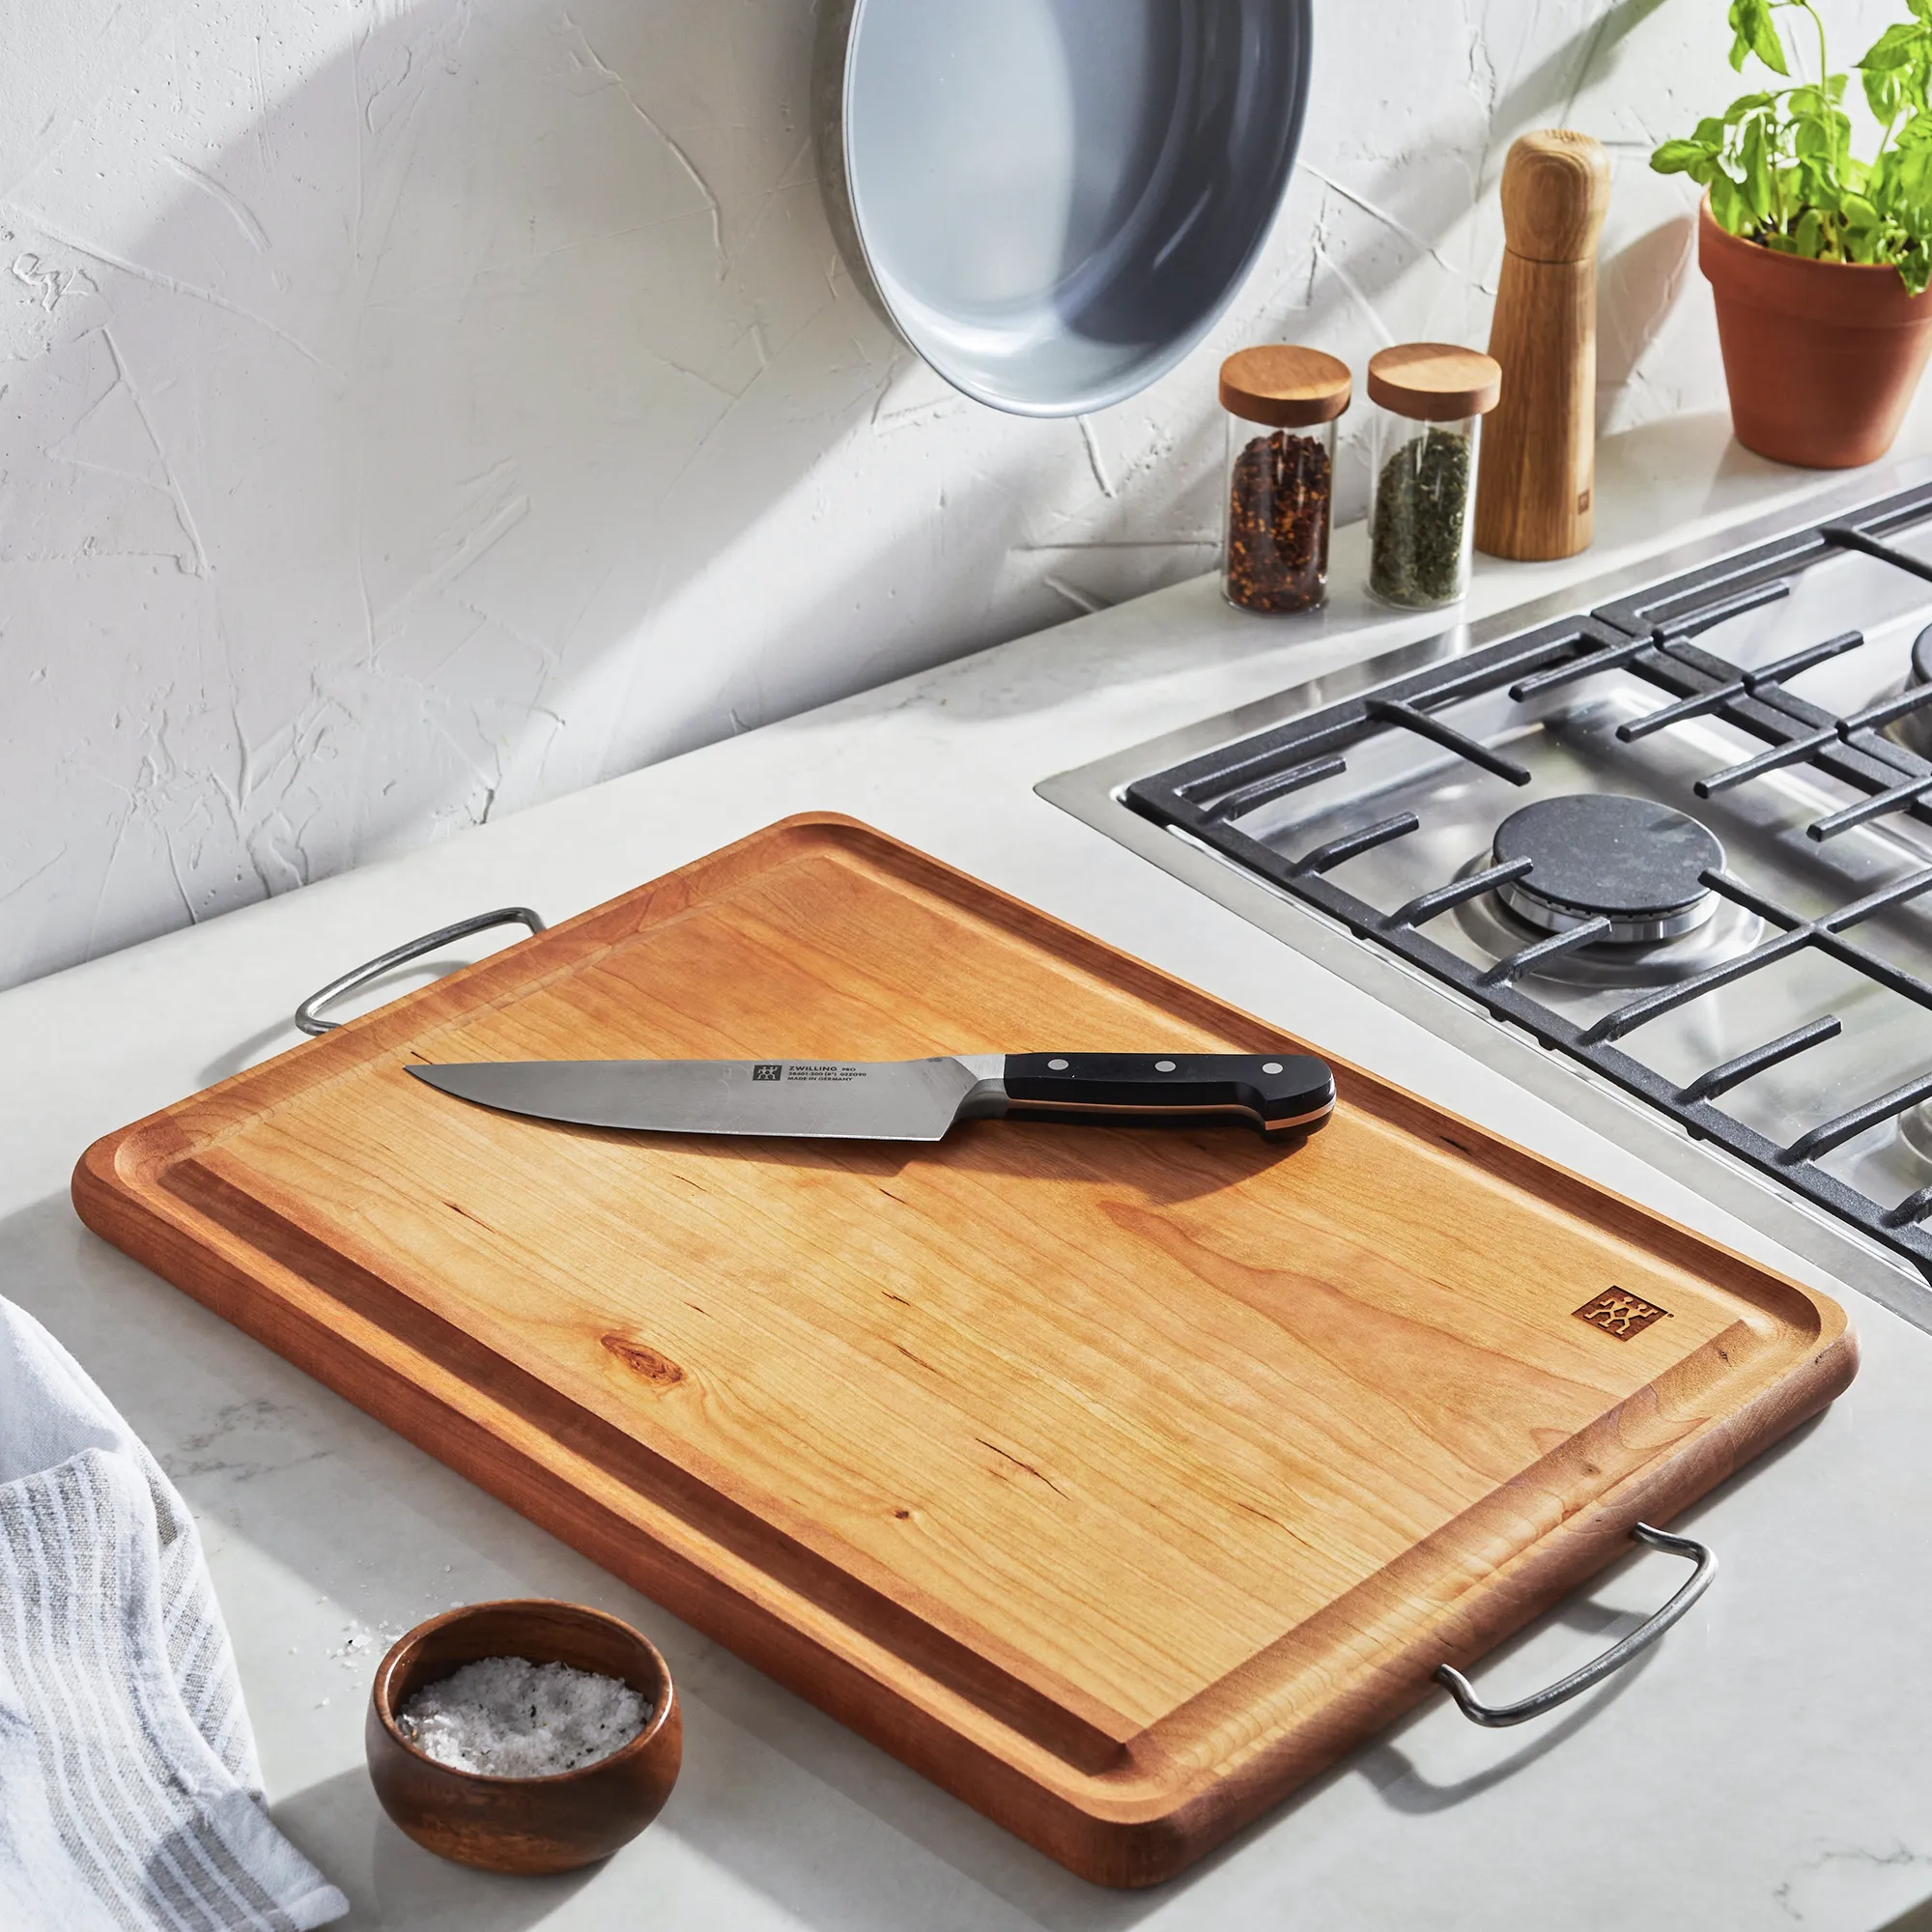 https://www.homethreads.com/files/zwilling/1023999-zwilling-cherry-wood-carving-board-with-handles-2.webp